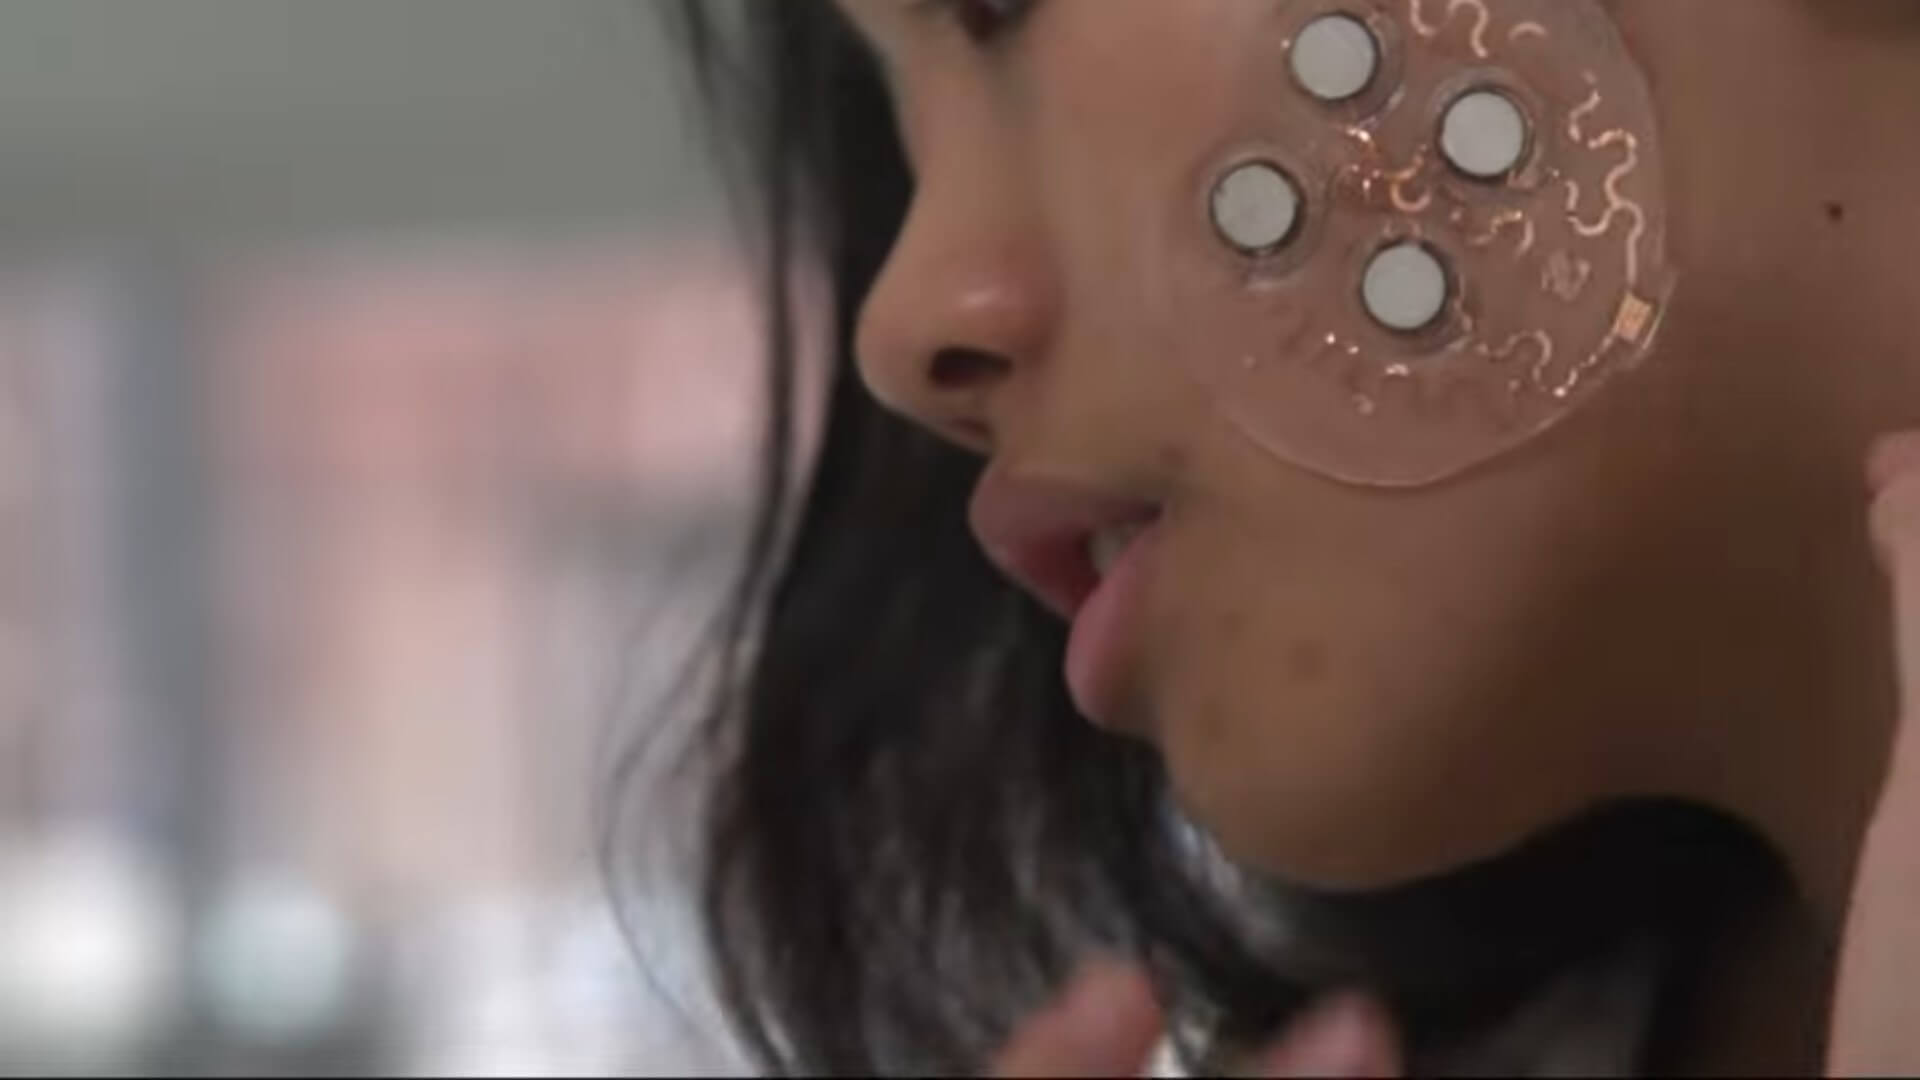 MIT ultrasound patch on a woman's face.